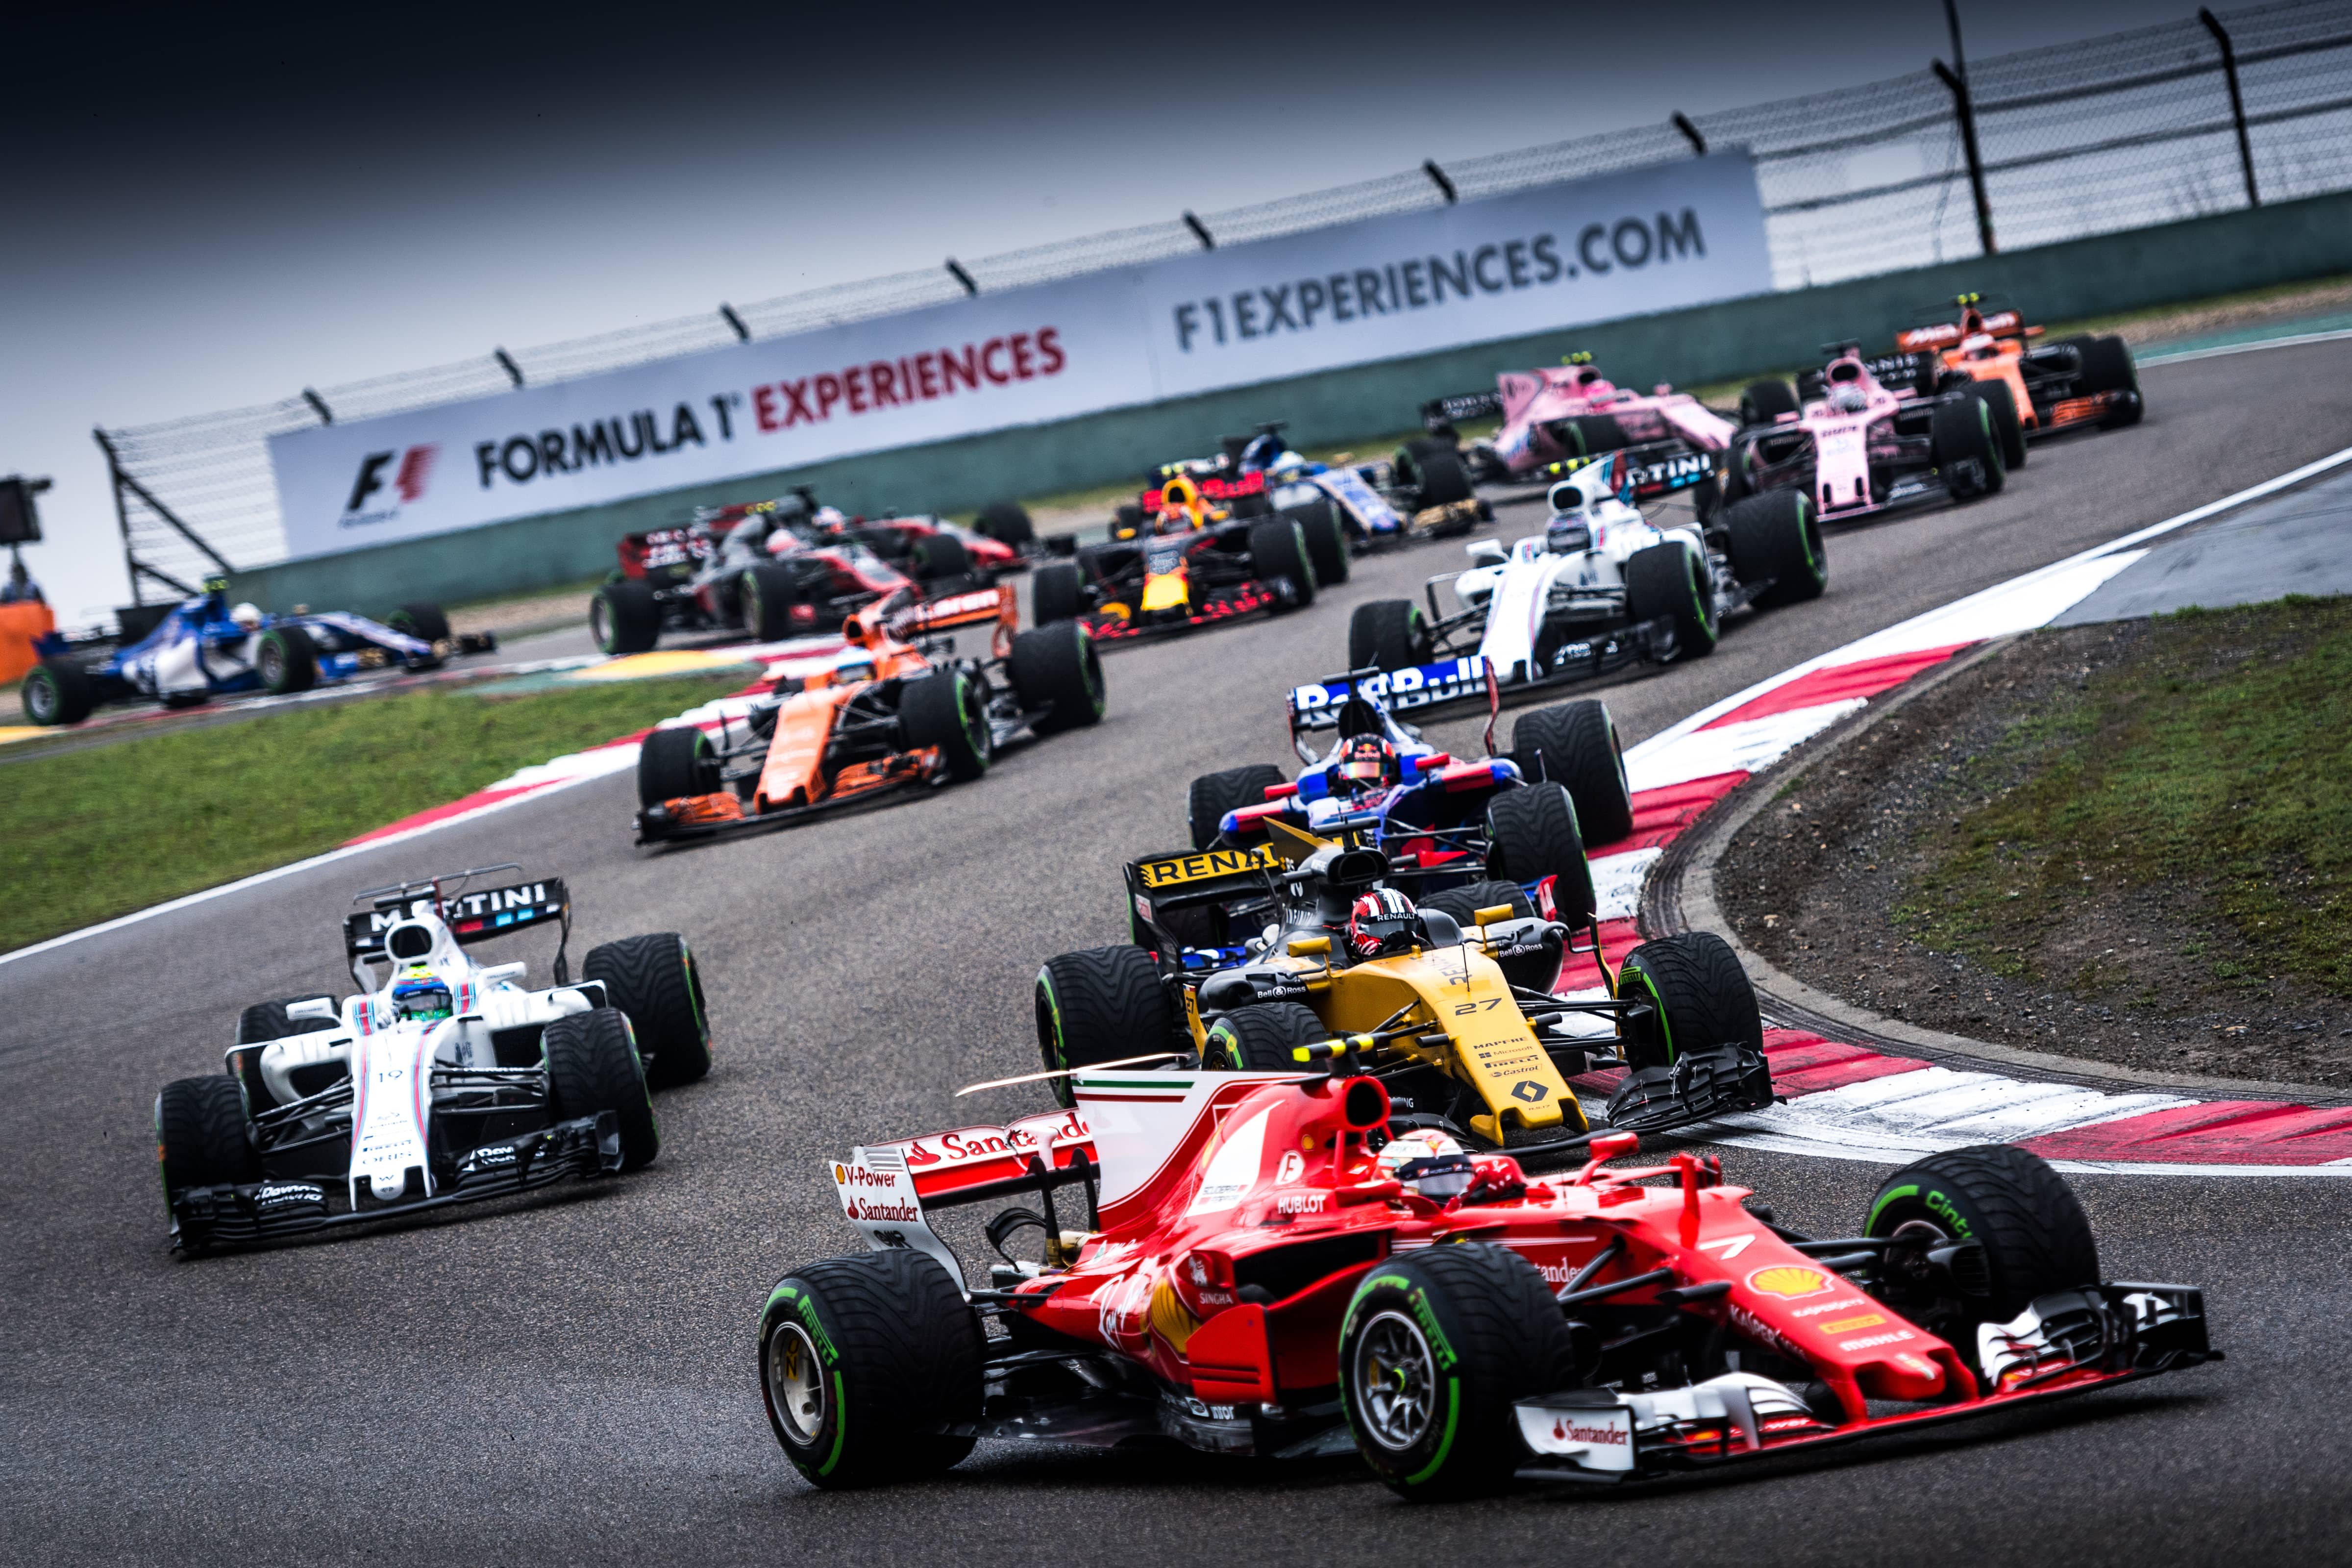  April 9, 2017: start the F1 race at Formula One Chinese Grand Prix at Shanghai Circuit.